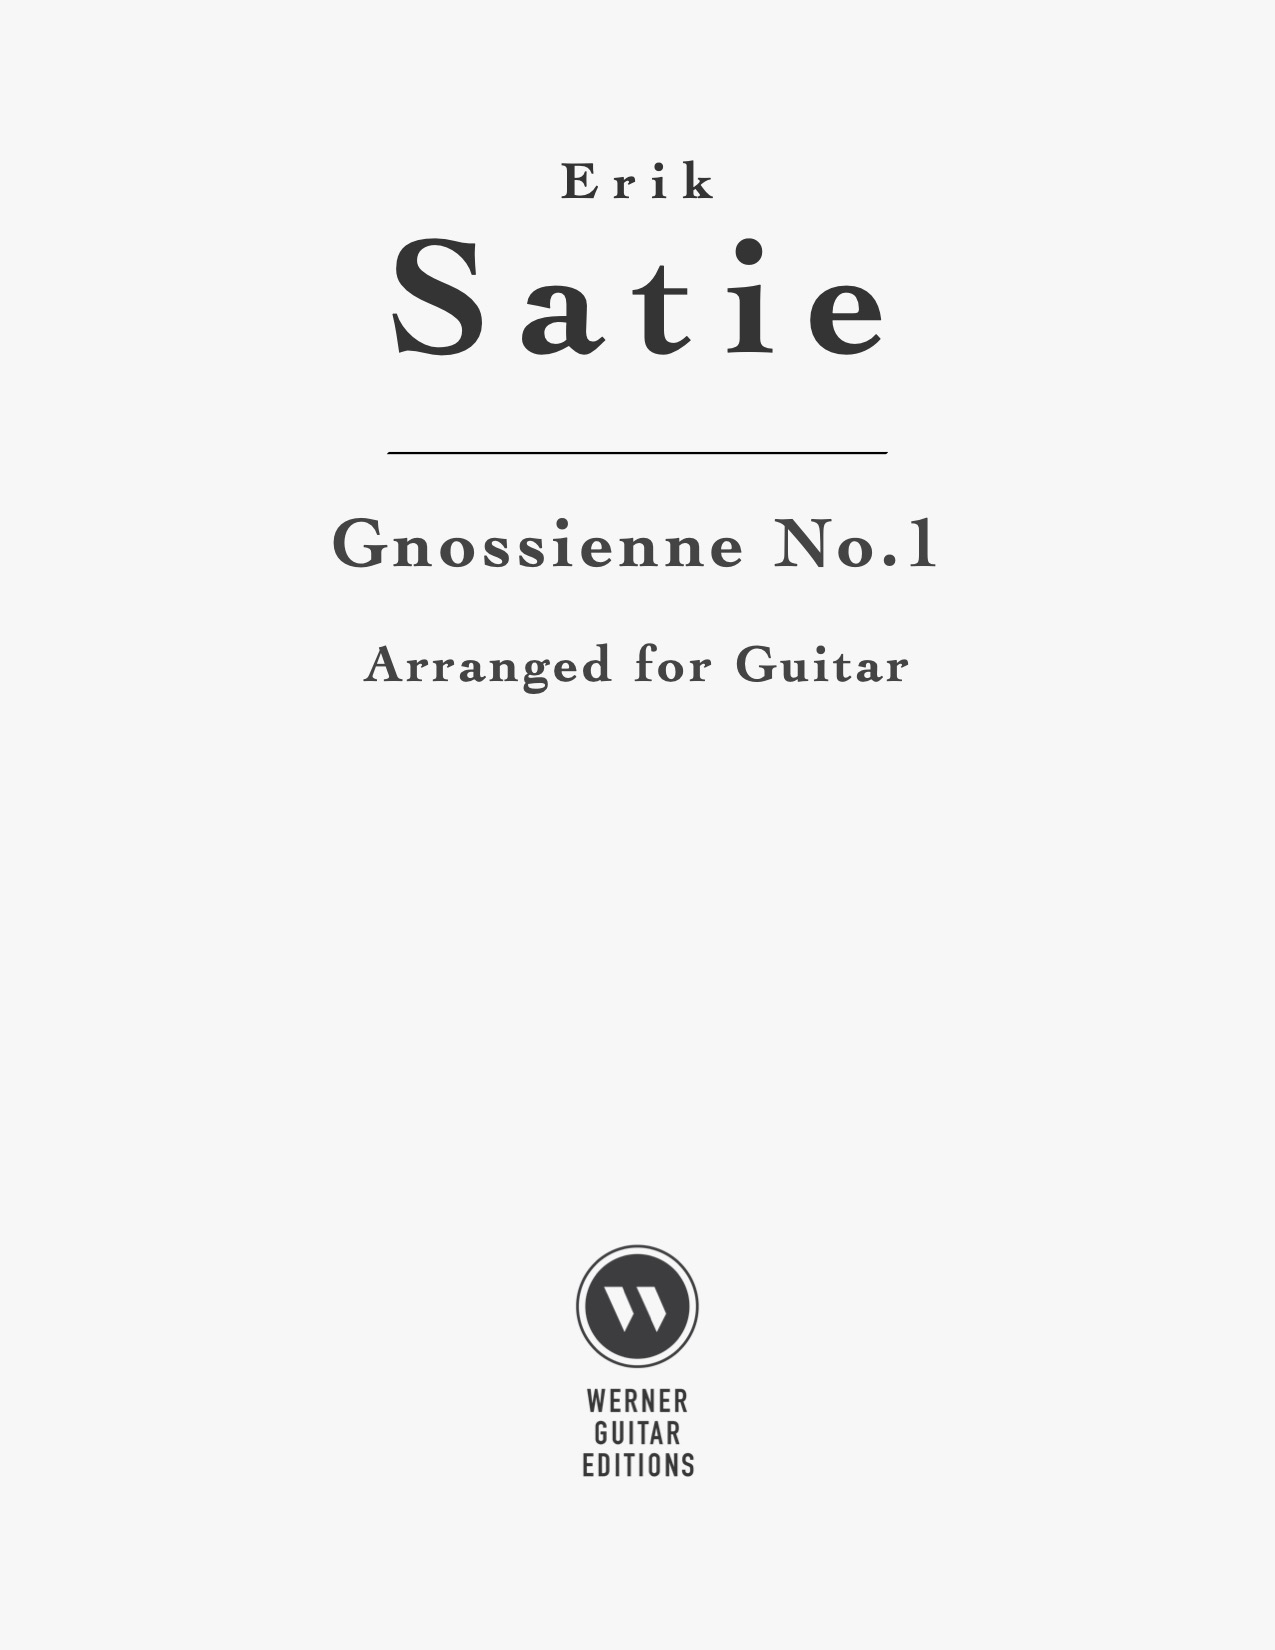 Gnossienne No.1 by Erik Satie for classical guitar